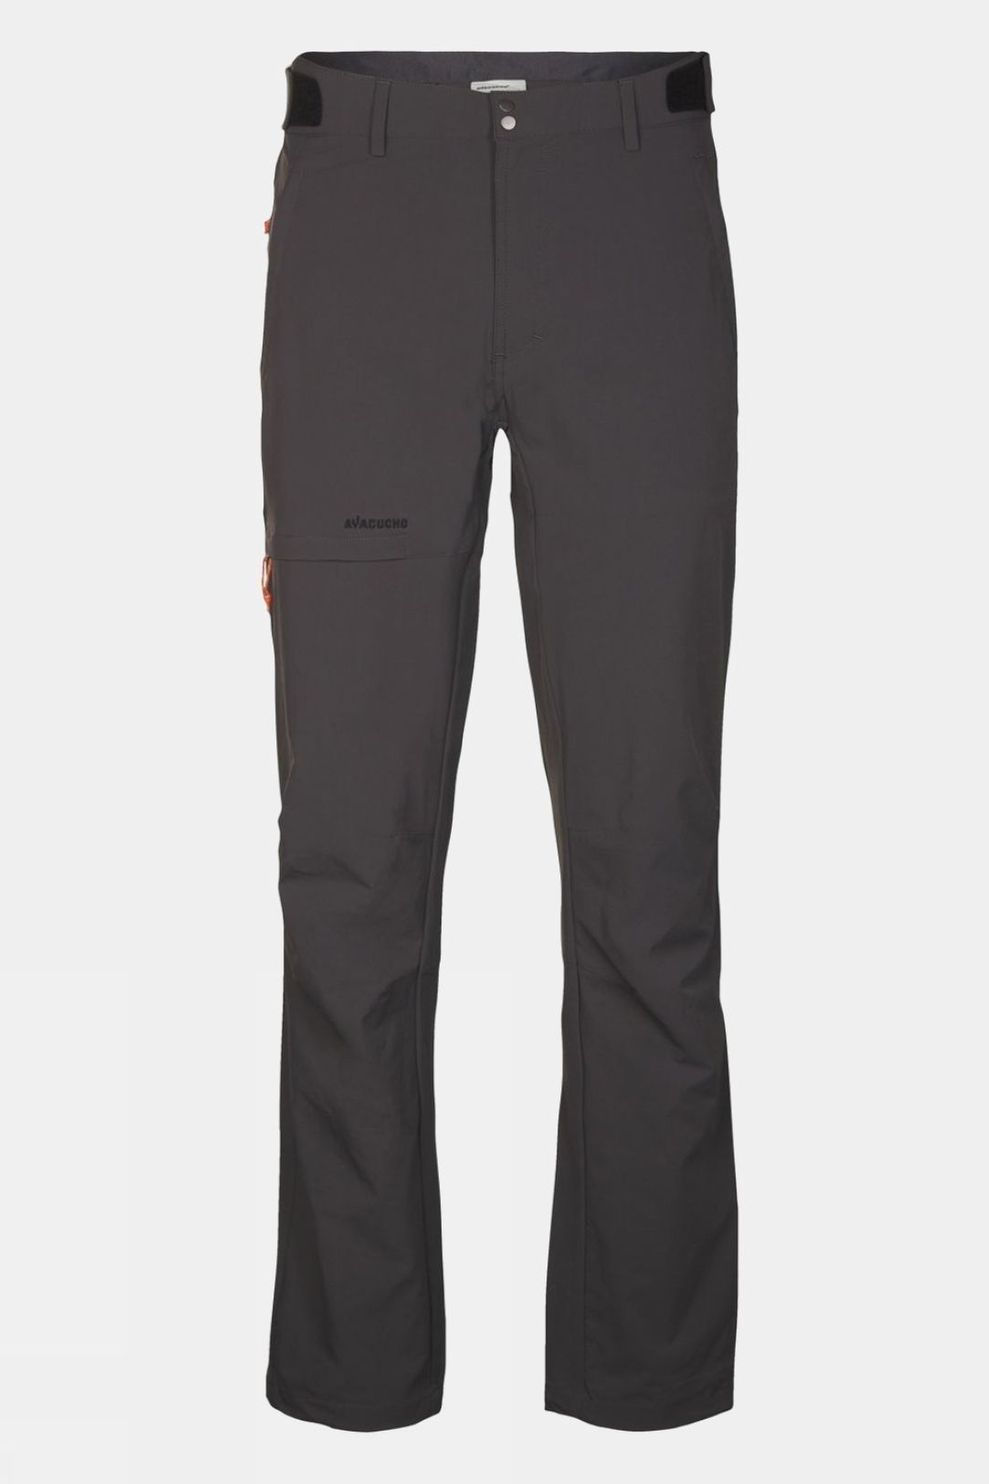 Ayacucho Mens Forest Softshell Pants